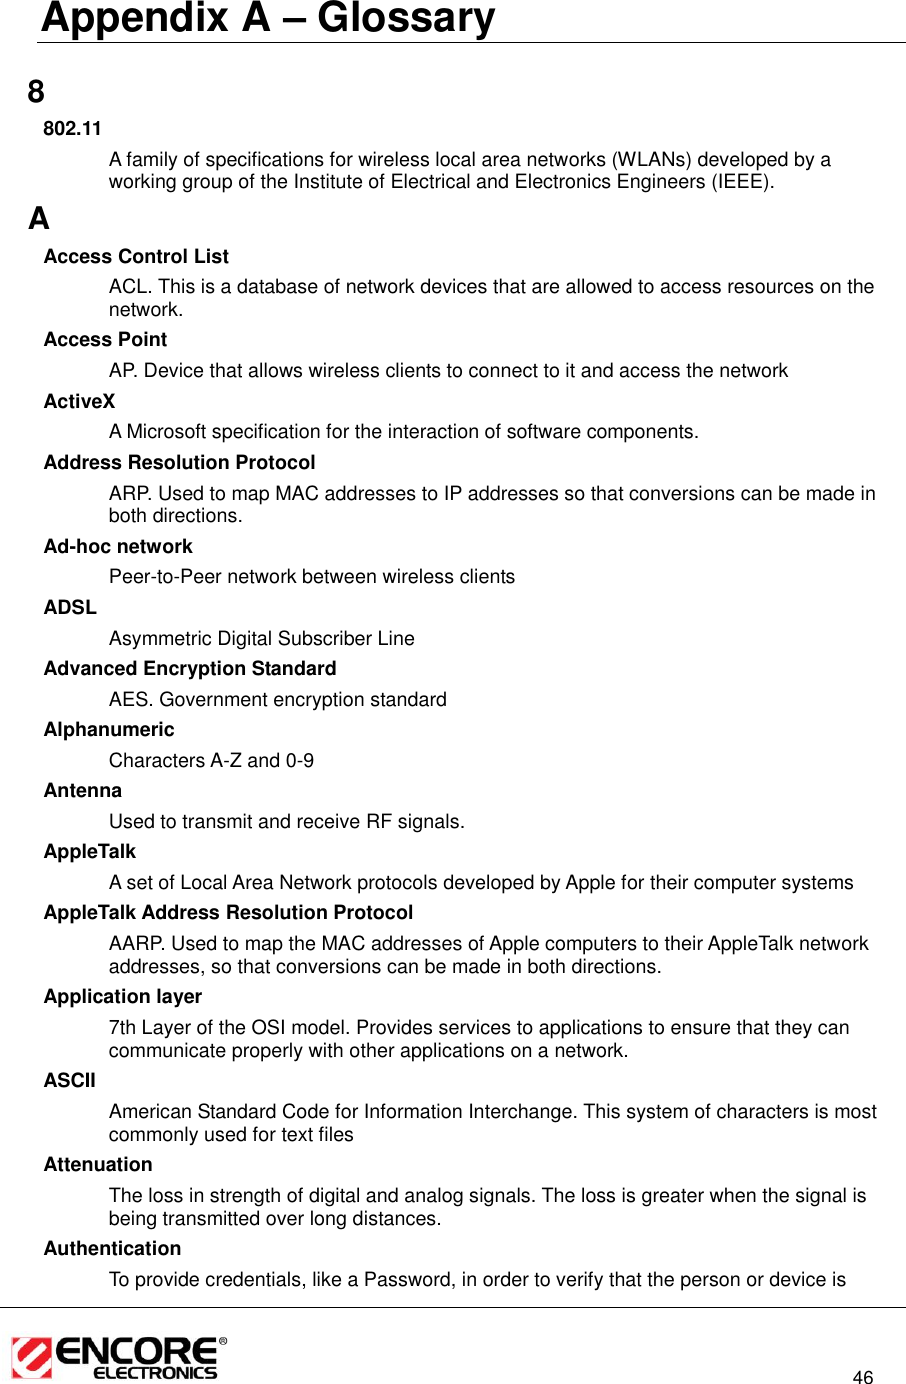                                                                                                                          46  Appendix A – Glossary   8 802.11 A family of specifications for wireless local area networks (WLANs) developed by a working group of the Institute of Electrical and Electronics Engineers (IEEE).  A Access Control List ACL. This is a database of network devices that are allowed to access resources on the network. Access Point AP. Device that allows wireless clients to connect to it and access the network ActiveX A Microsoft specification for the interaction of software components.  Address Resolution Protocol ARP. Used to map MAC addresses to IP addresses so that conversions can be made in both directions. Ad-hoc network Peer-to-Peer network between wireless clients ADSL Asymmetric Digital Subscriber Line Advanced Encryption Standard AES. Government encryption standard Alphanumeric Characters A-Z and 0-9 Antenna Used to transmit and receive RF signals. AppleTalk A set of Local Area Network protocols developed by Apple for their computer systems AppleTalk Address Resolution Protocol AARP. Used to map the MAC addresses of Apple computers to their AppleTalk network addresses, so that conversions can be made in both directions. Application layer 7th Layer of the OSI model. Provides services to applications to ensure that they can communicate properly with other applications on a network. ASCII American Standard Code for Information Interchange. This system of characters is most commonly used for text files Attenuation The loss in strength of digital and analog signals. The loss is greater when the signal is being transmitted over long distances. Authentication To provide credentials, like a Password, in order to verify that the person or device is 